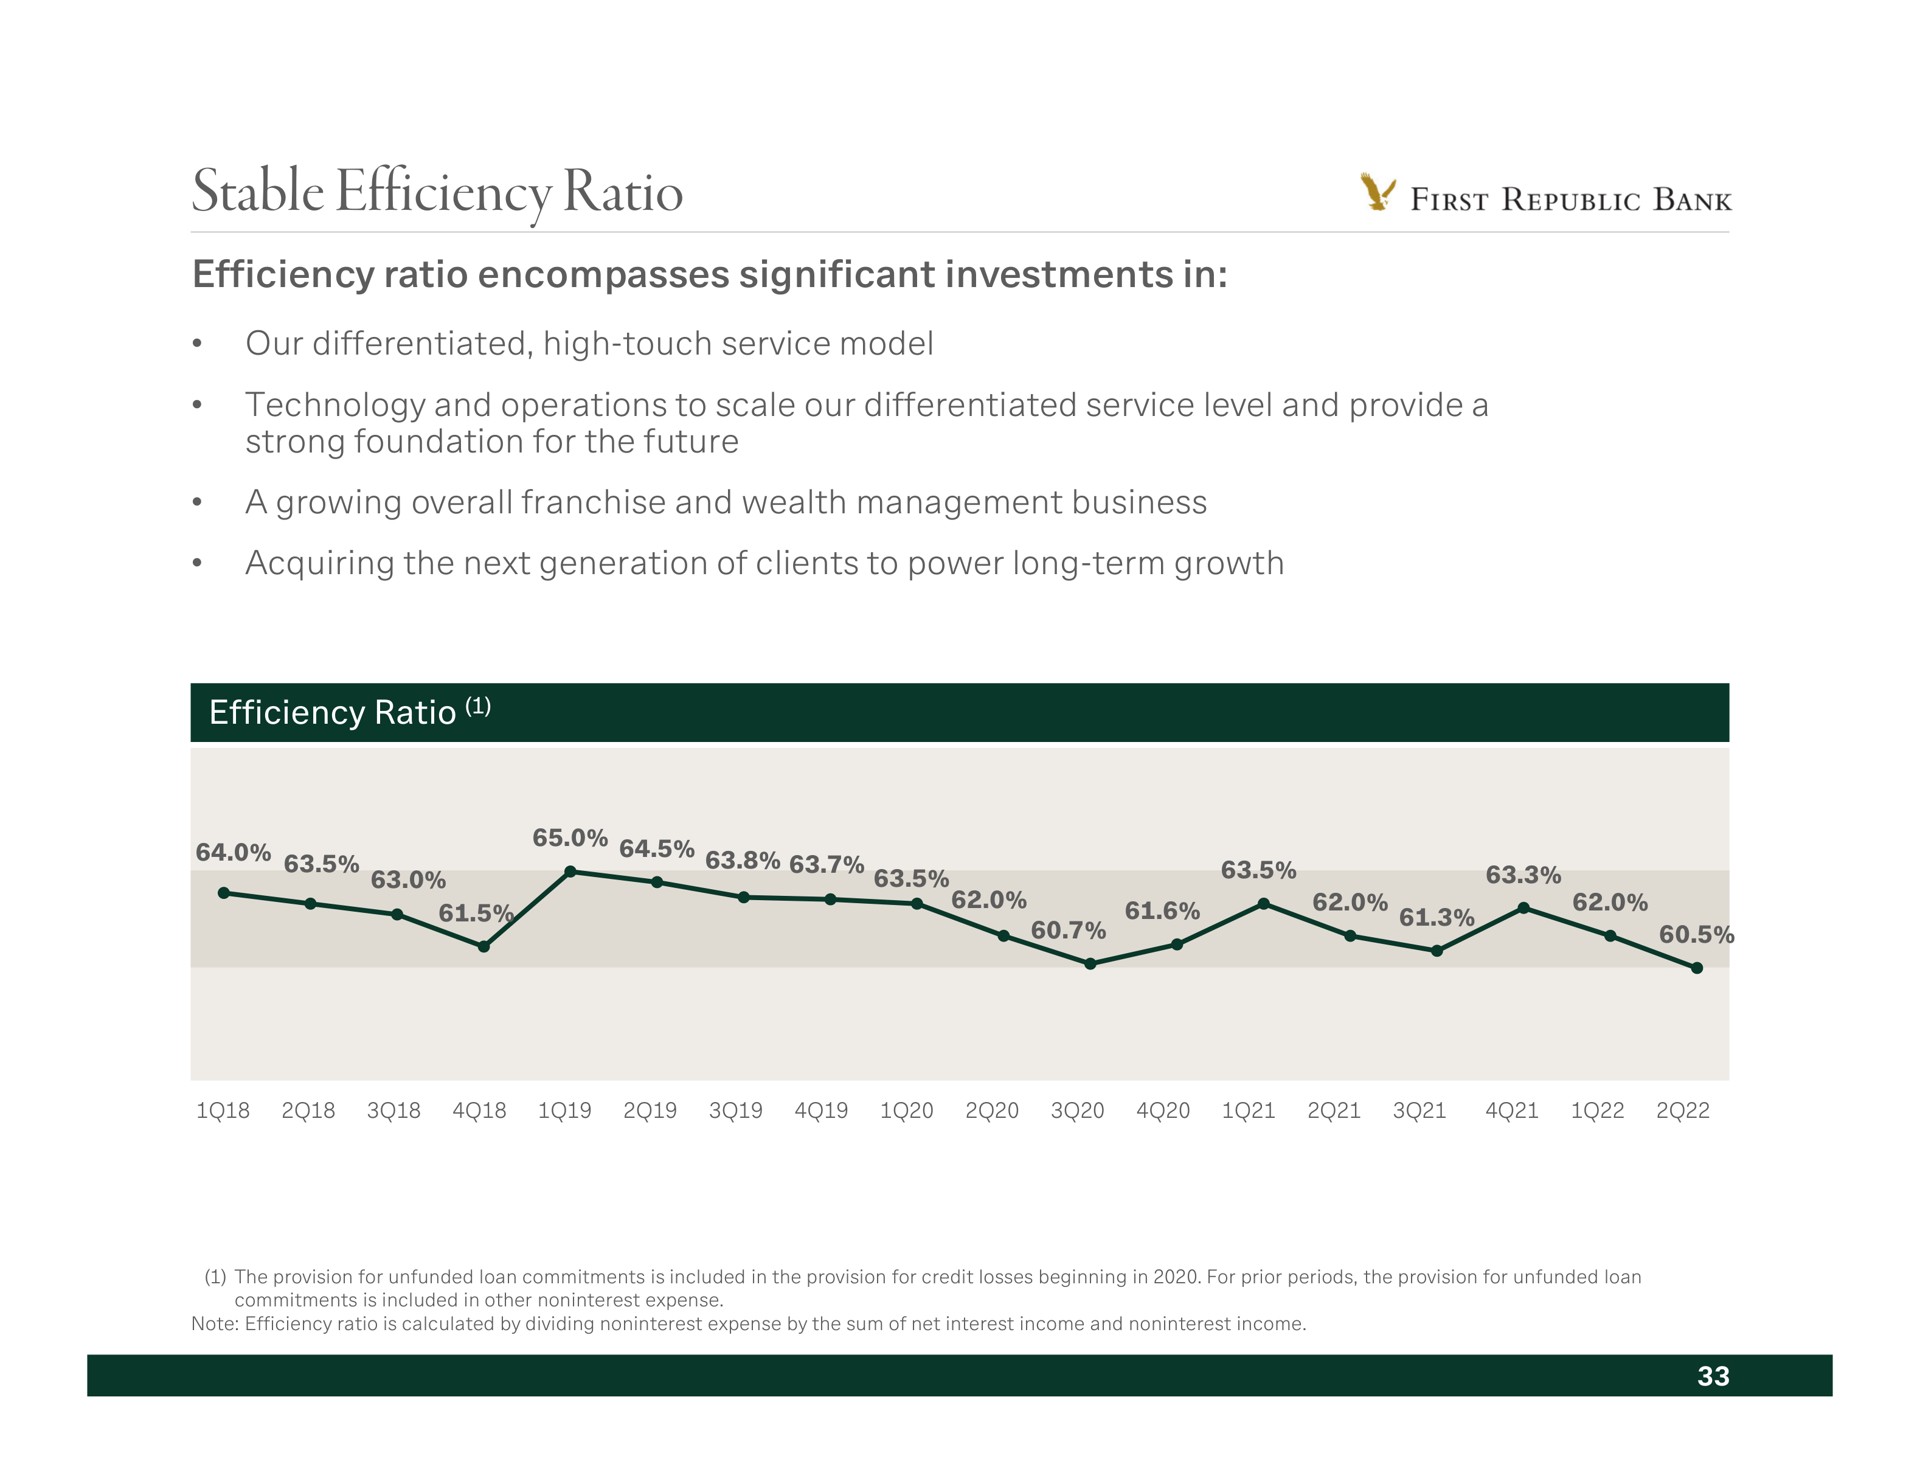 stable efficiency ratio encompasses significant investments in | First Republic Bank